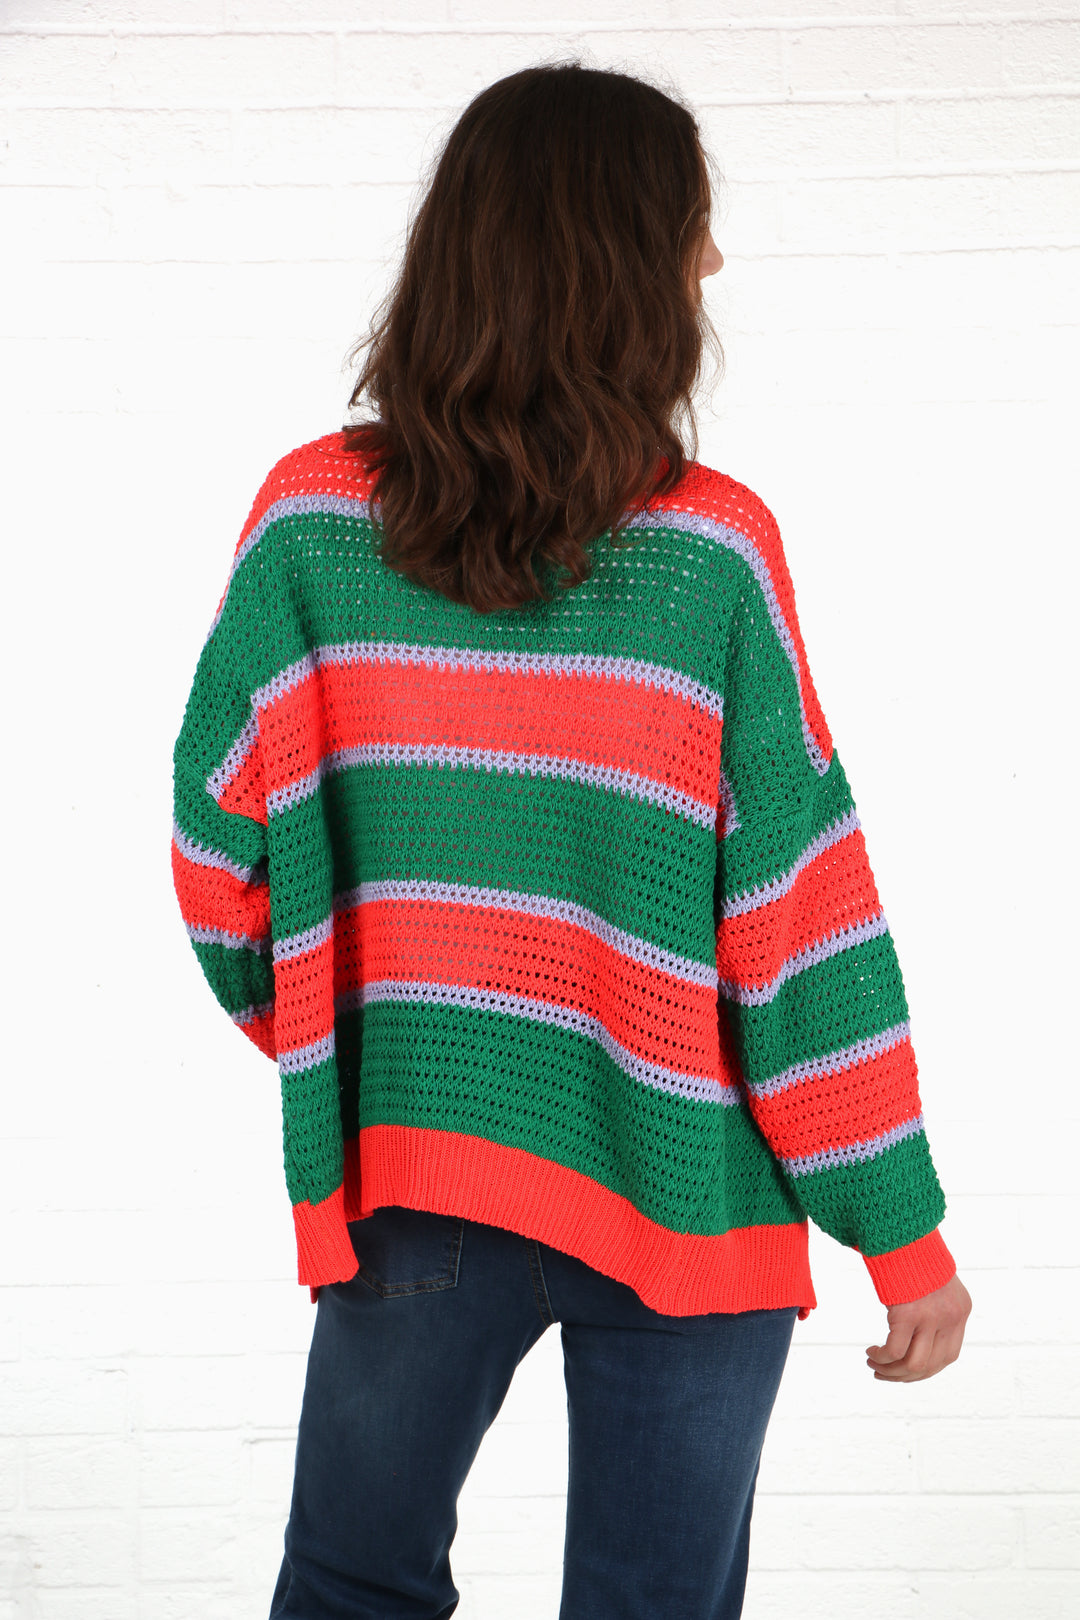 model showing the back of the green and orange striped cardigan showing an all over striped pattern